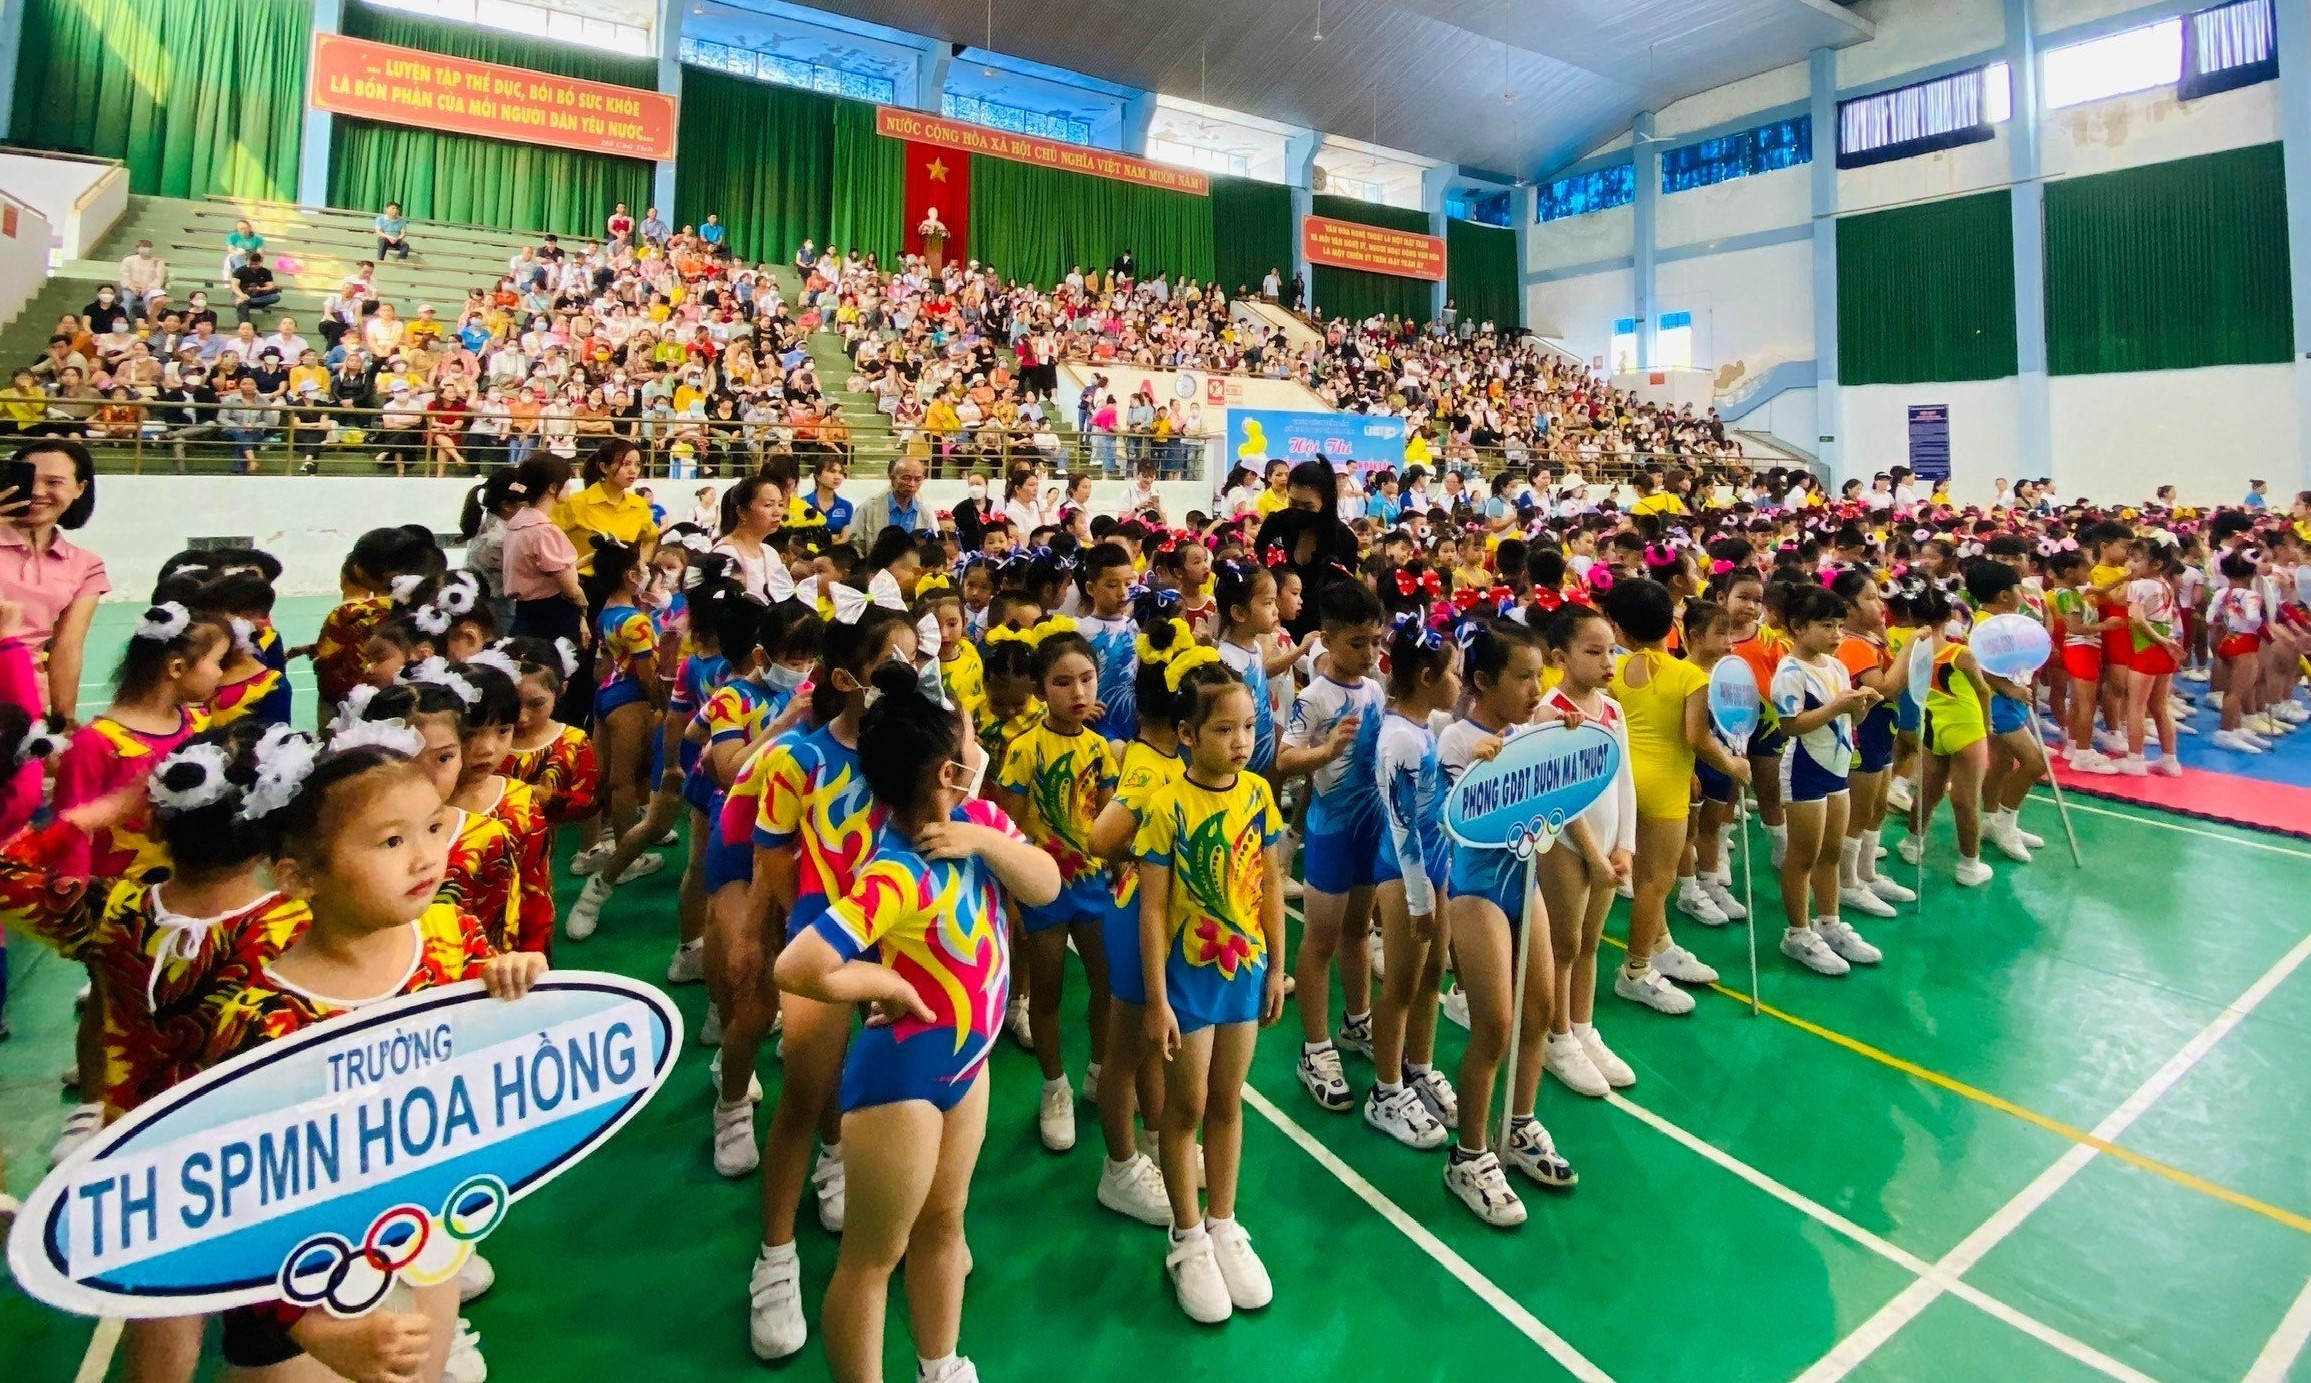 More than 750 preschoolers participated in the Dak Lak province's Aerobic competition for the academic year 2022-2023